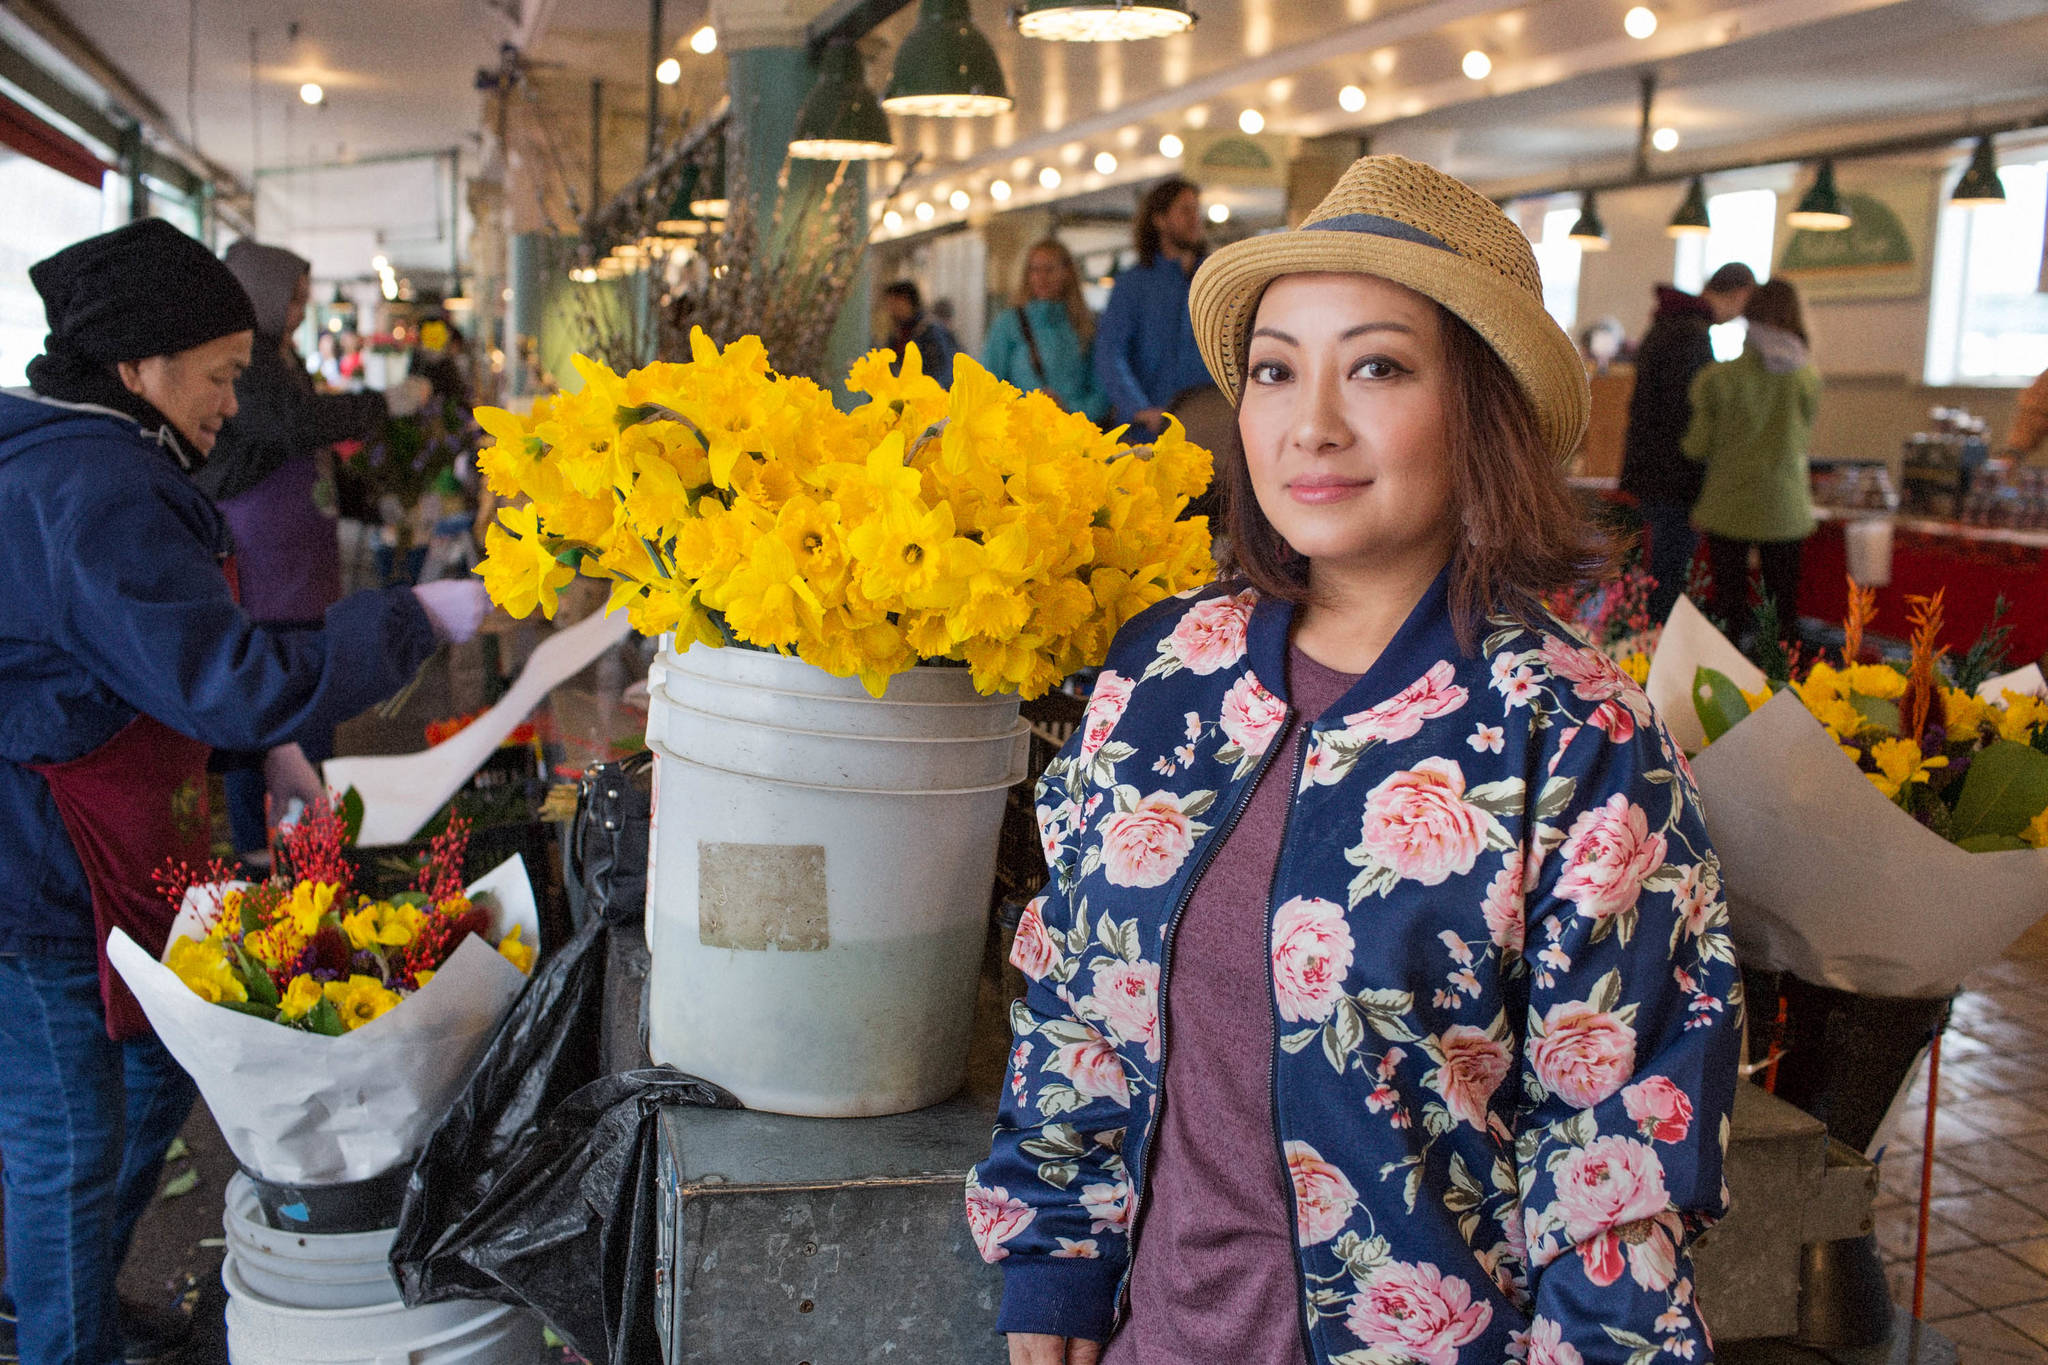 Spring daffodils are in bloom at the See Lee Farm table as Lue Eng of Thai Thao Farm pays a visit. Photographs by Rosemary Dai Ross/POSTheadshots